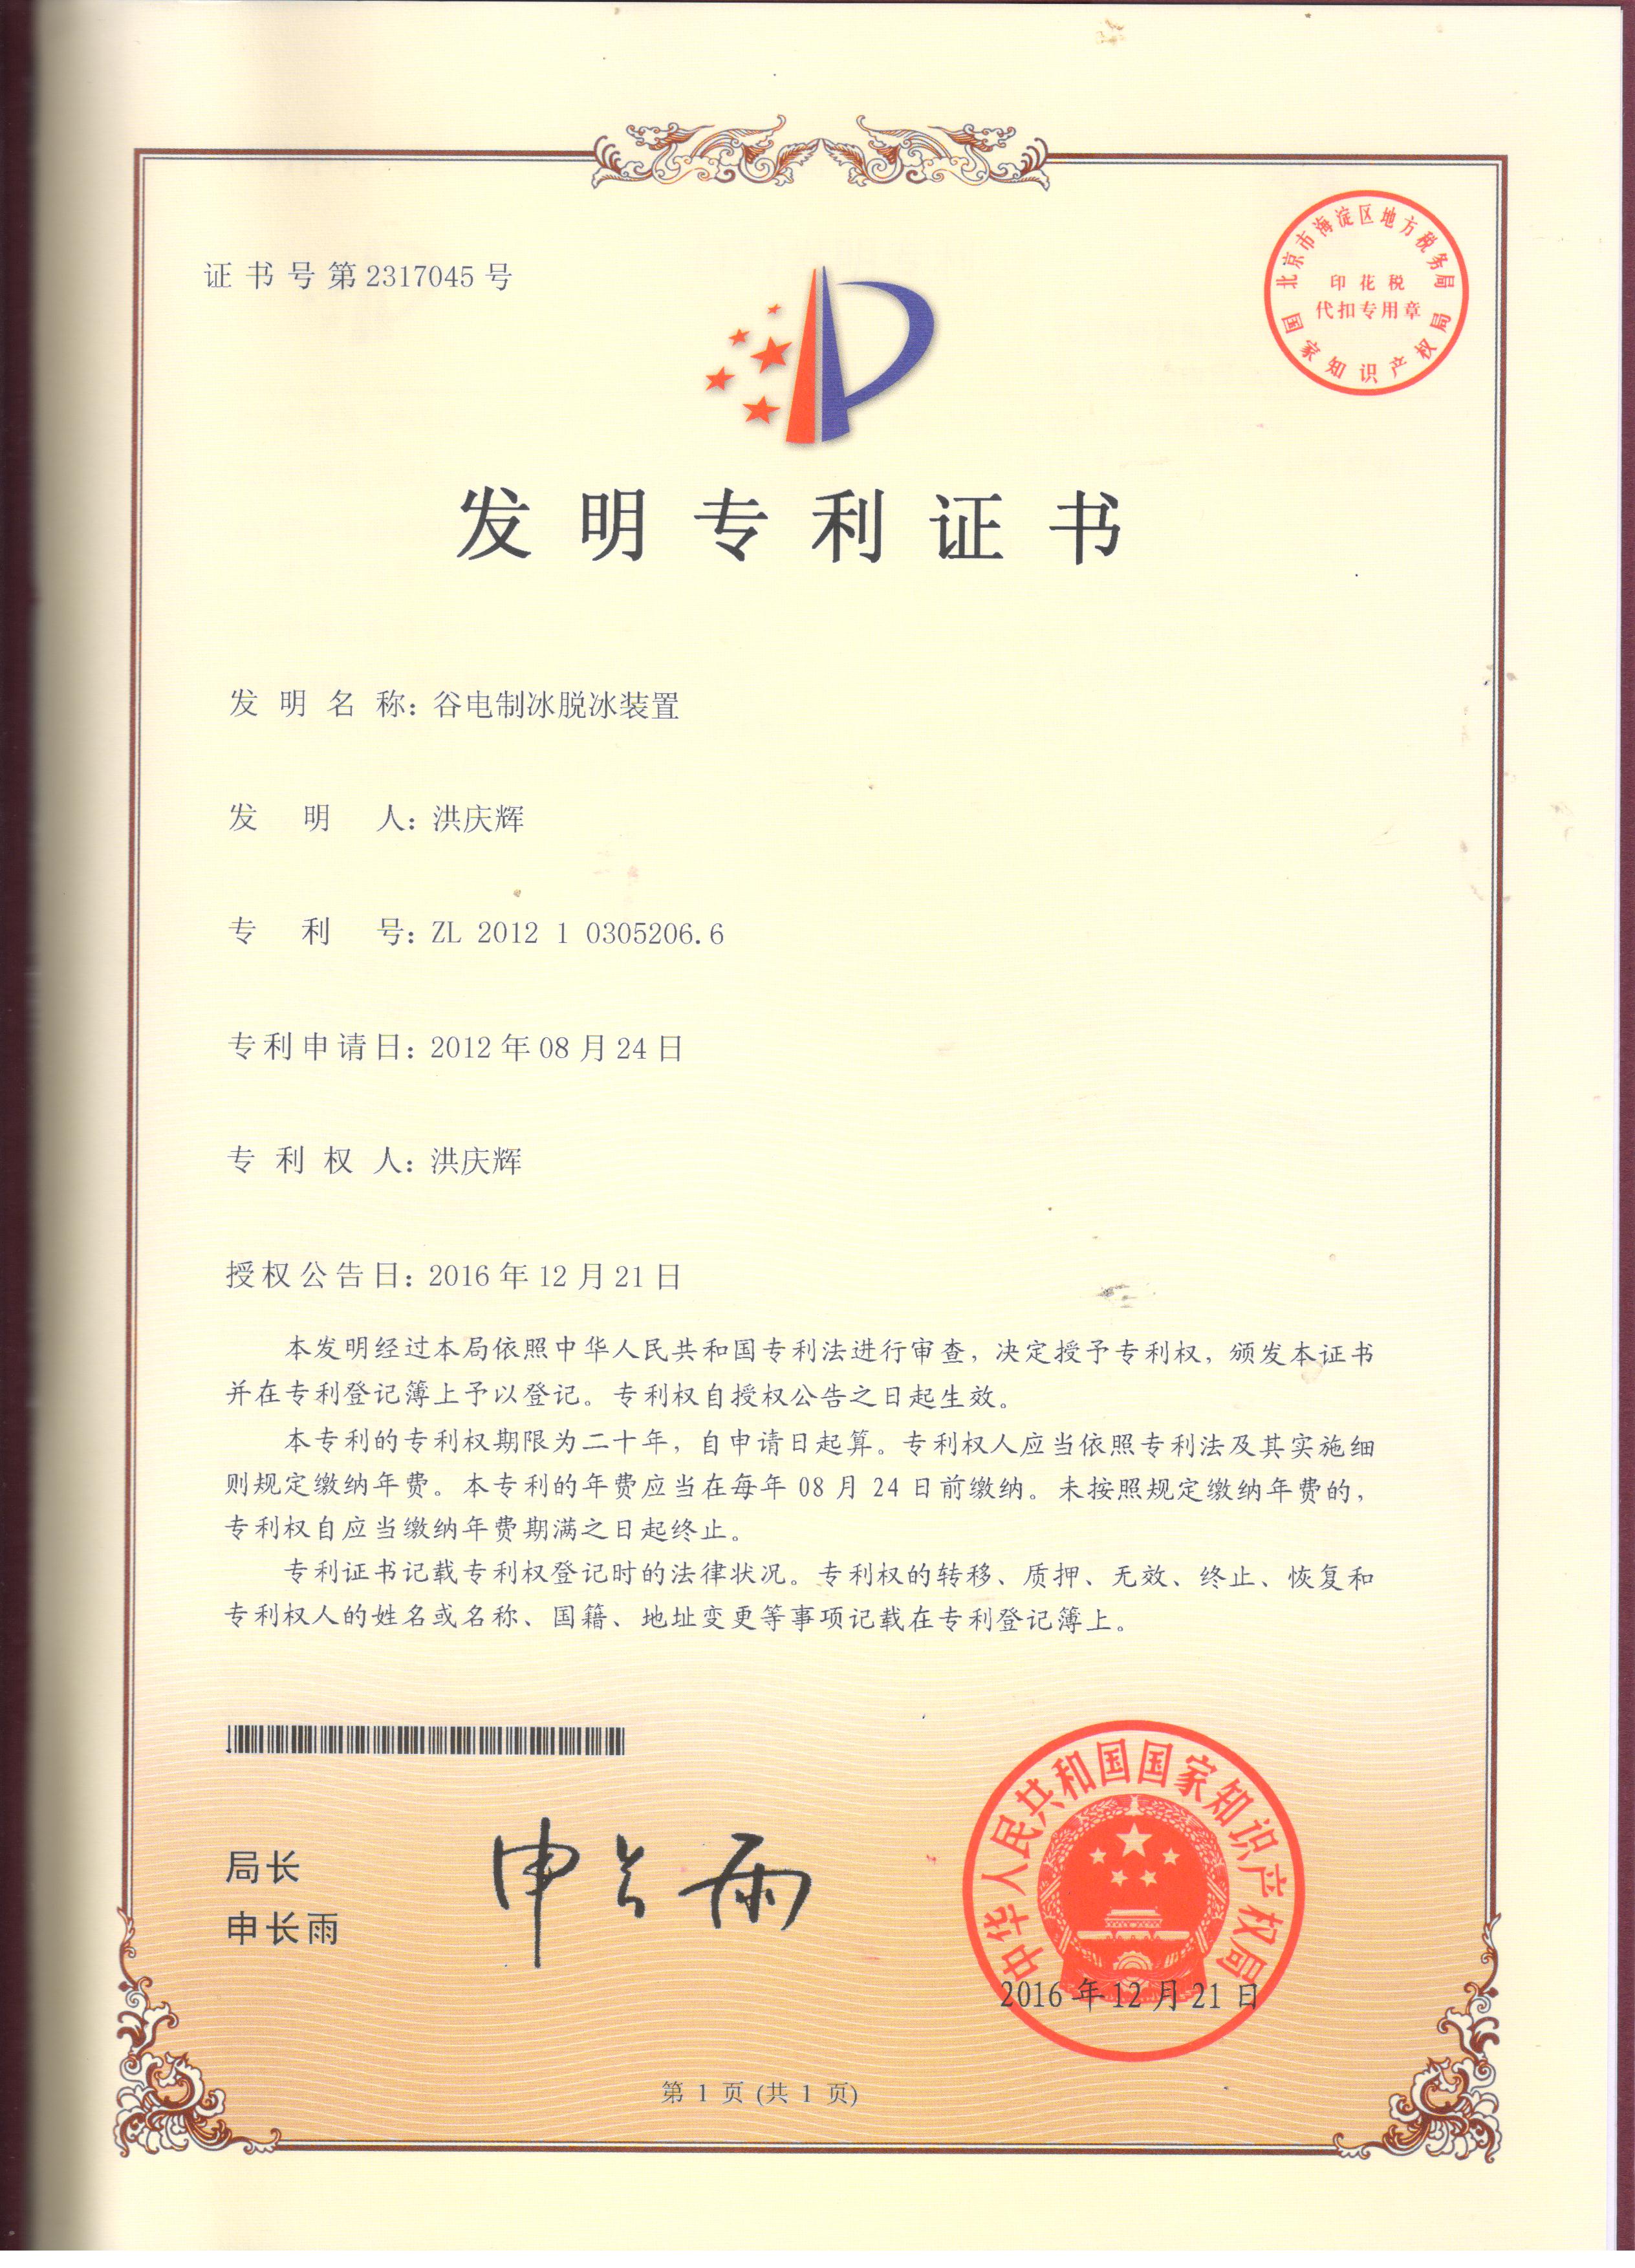 Great news - Guangzhou Jinhao Electric Co., Ltd. (Mingdi Heat Pump) once again obtained the national invention patent authorization